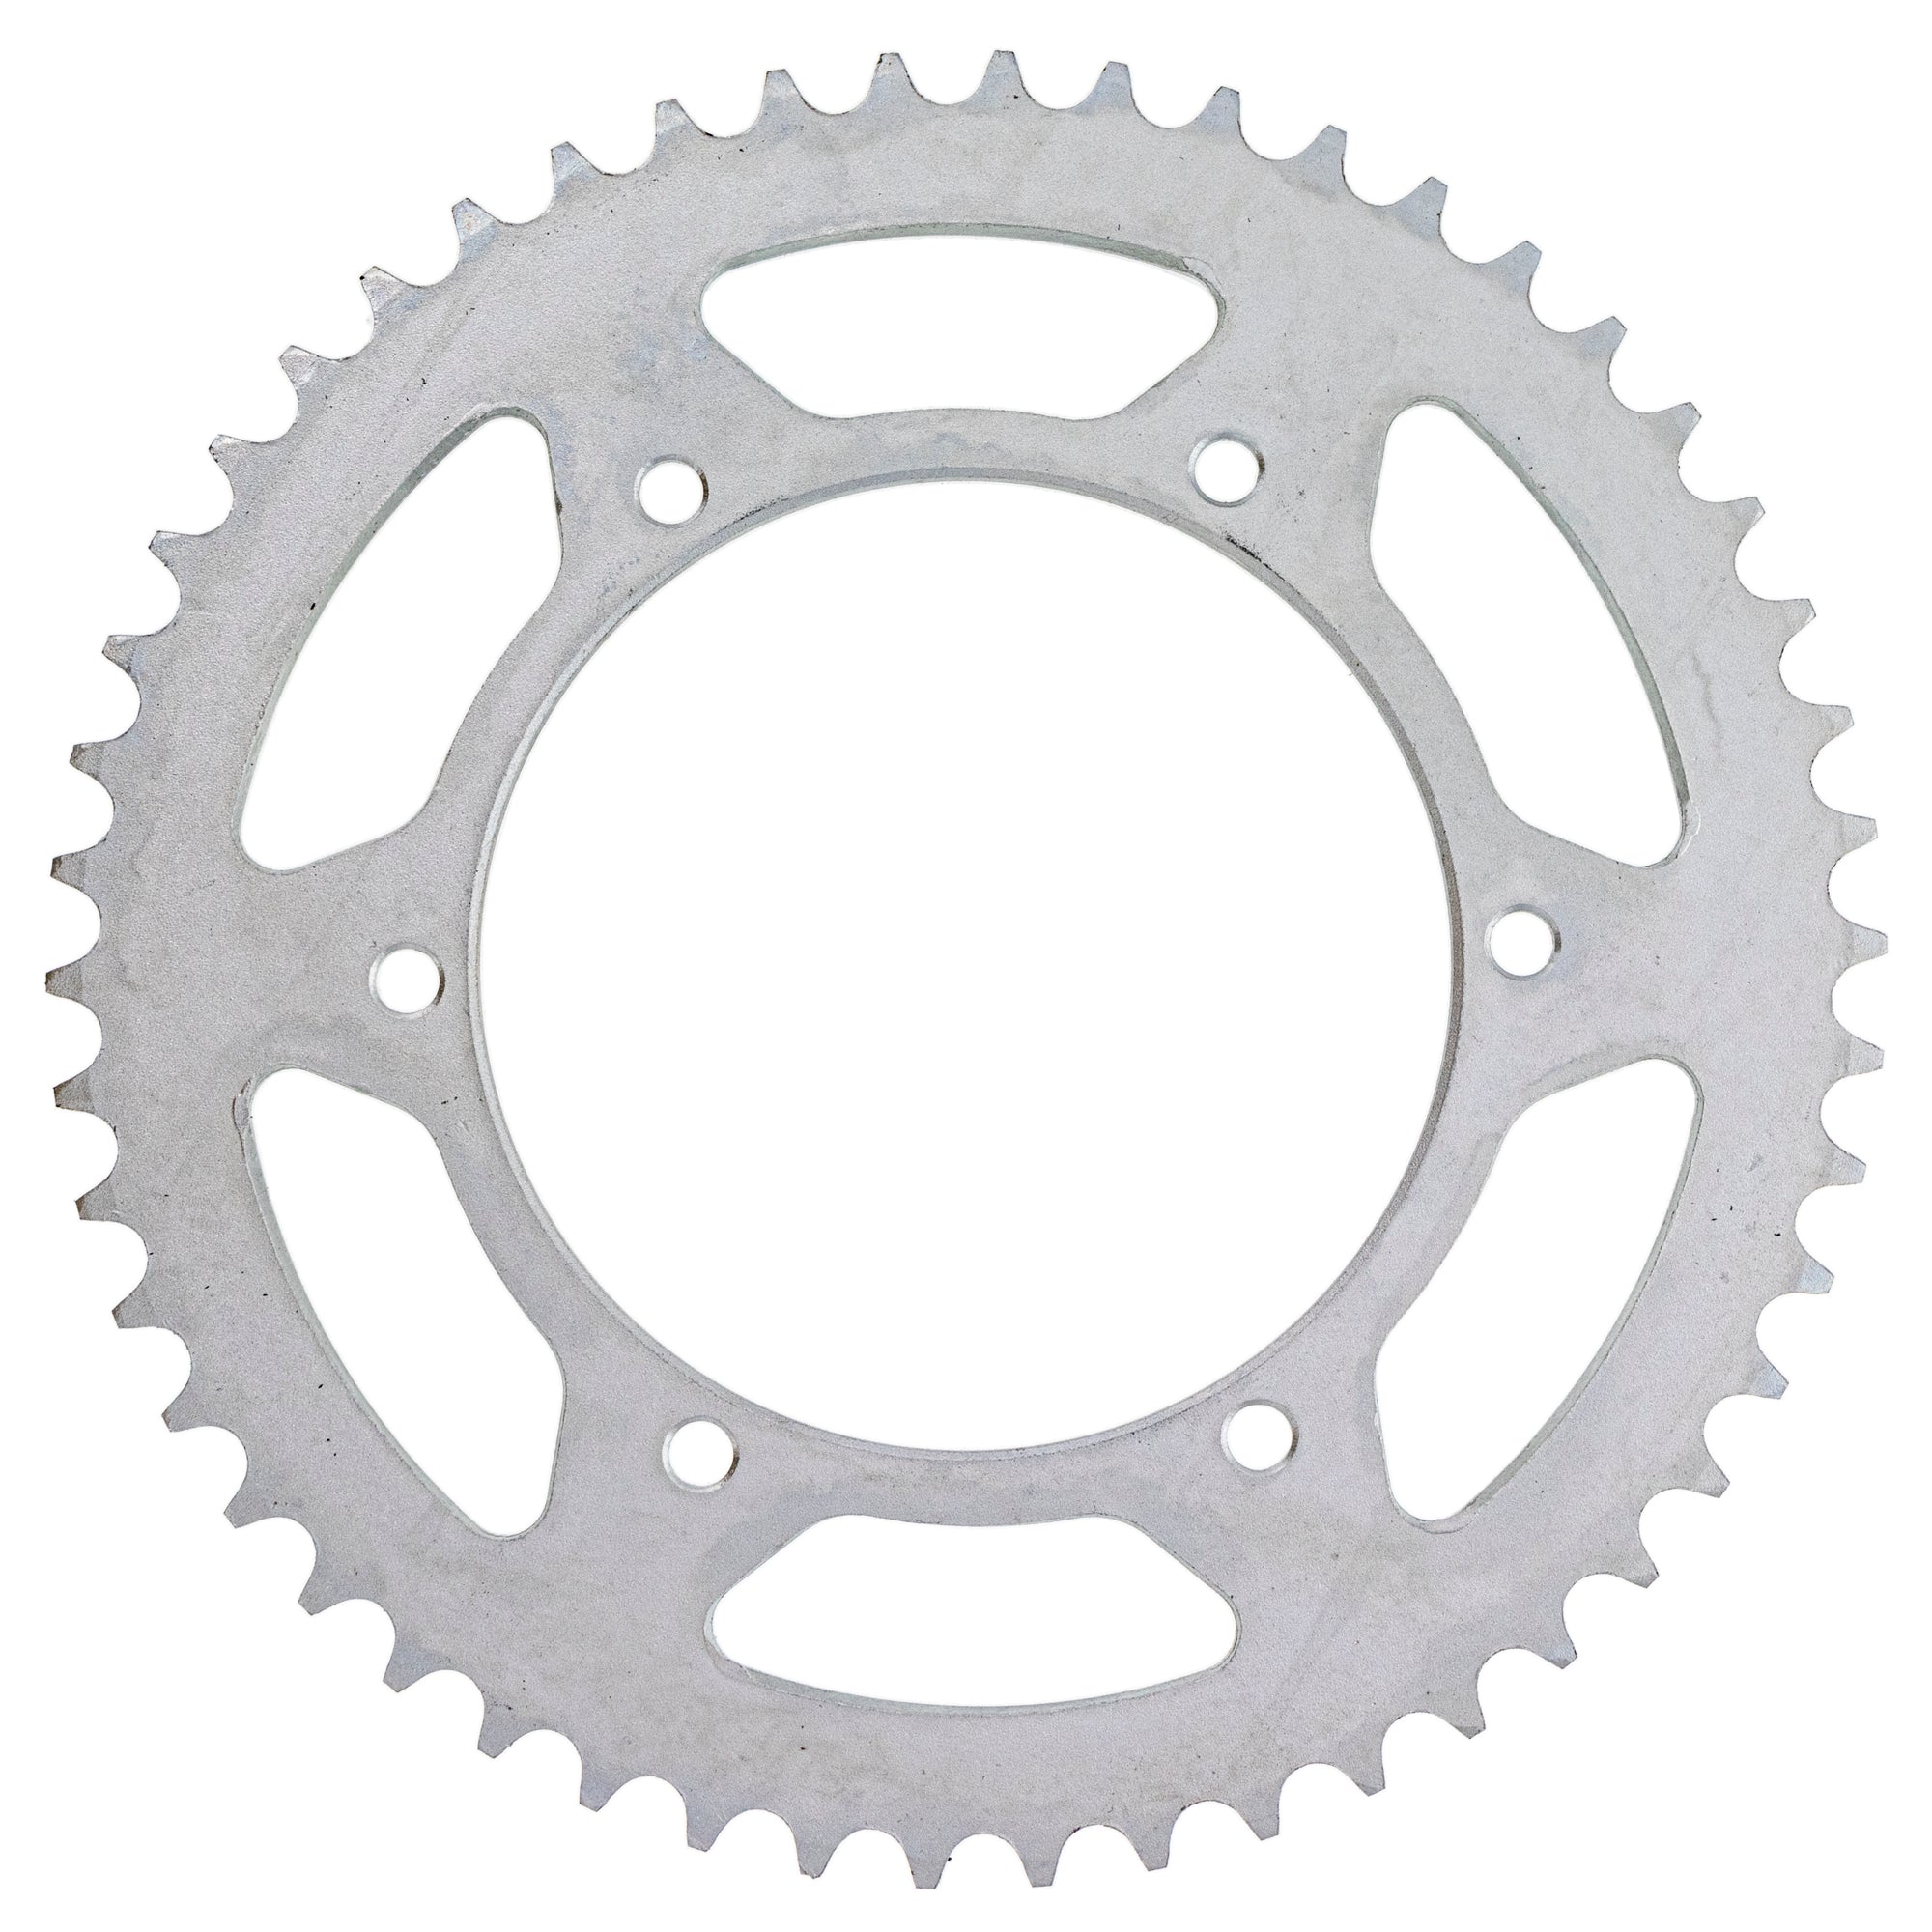 520 Pitch Front 13T Rear 50T Drive Sprocket Kit for Beta RR 350 400